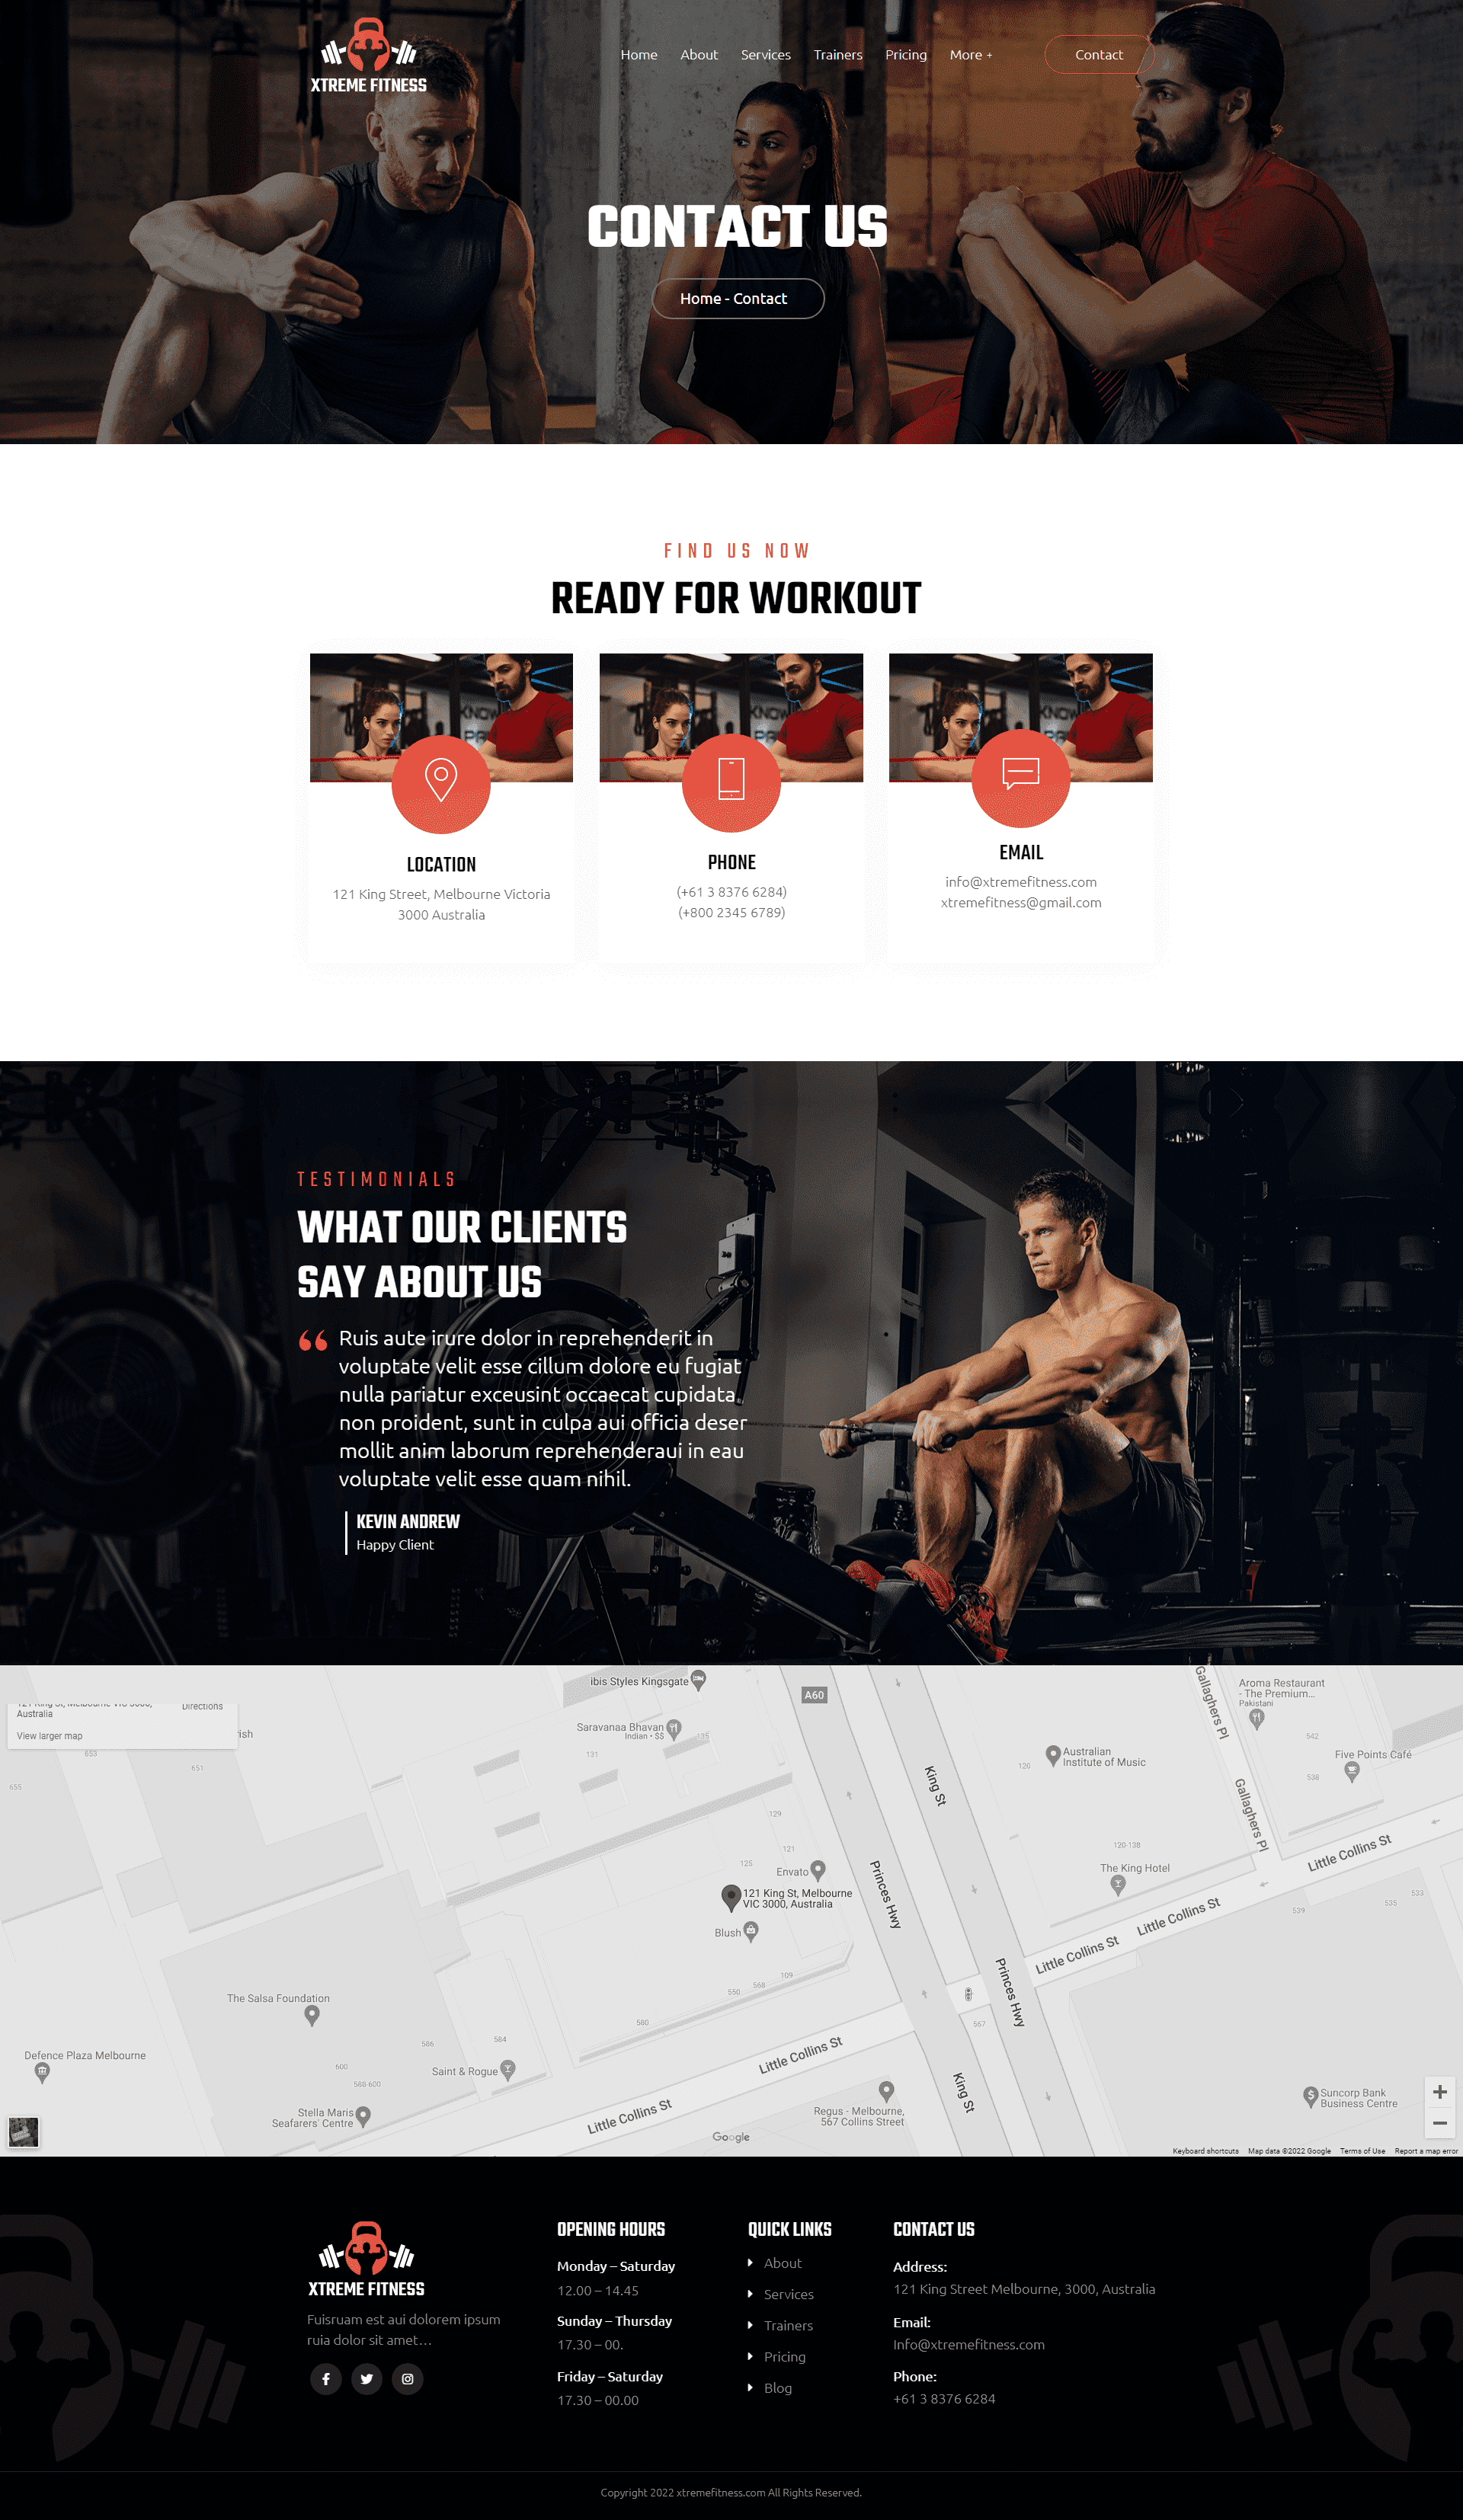 Location, phone and email of xtreme fitness.